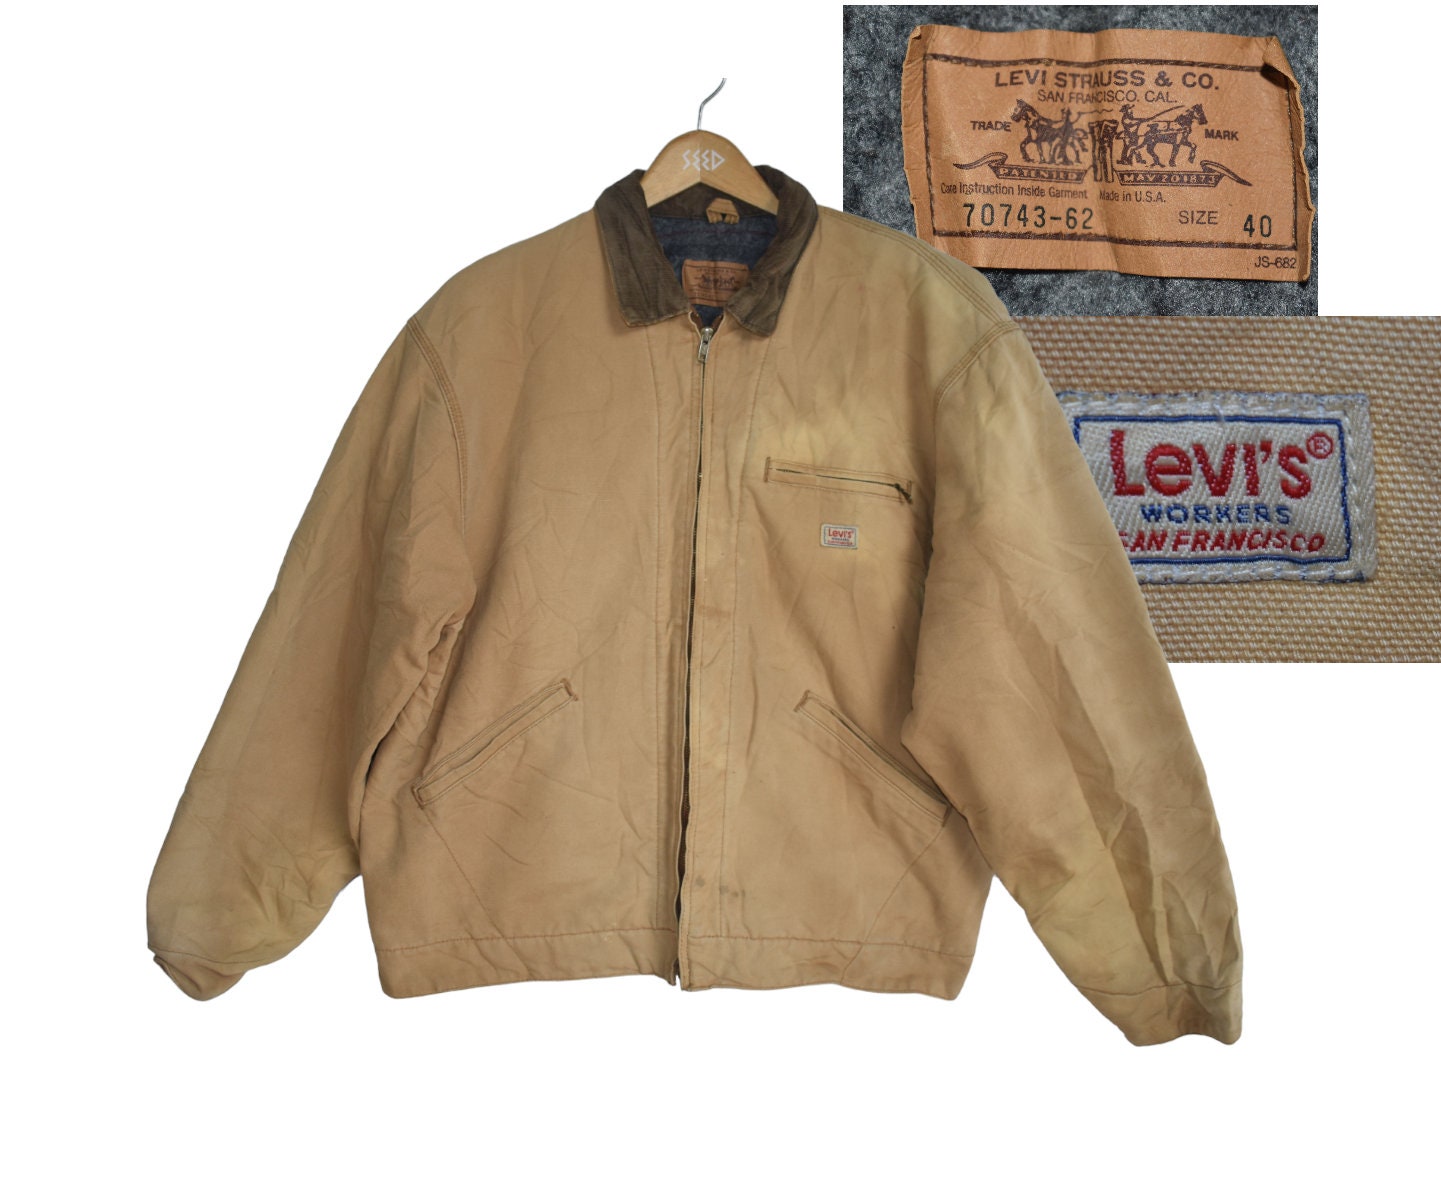 Vintage Levi's Heavy Workers Jacket With Blanked Lining - Etsy Finland